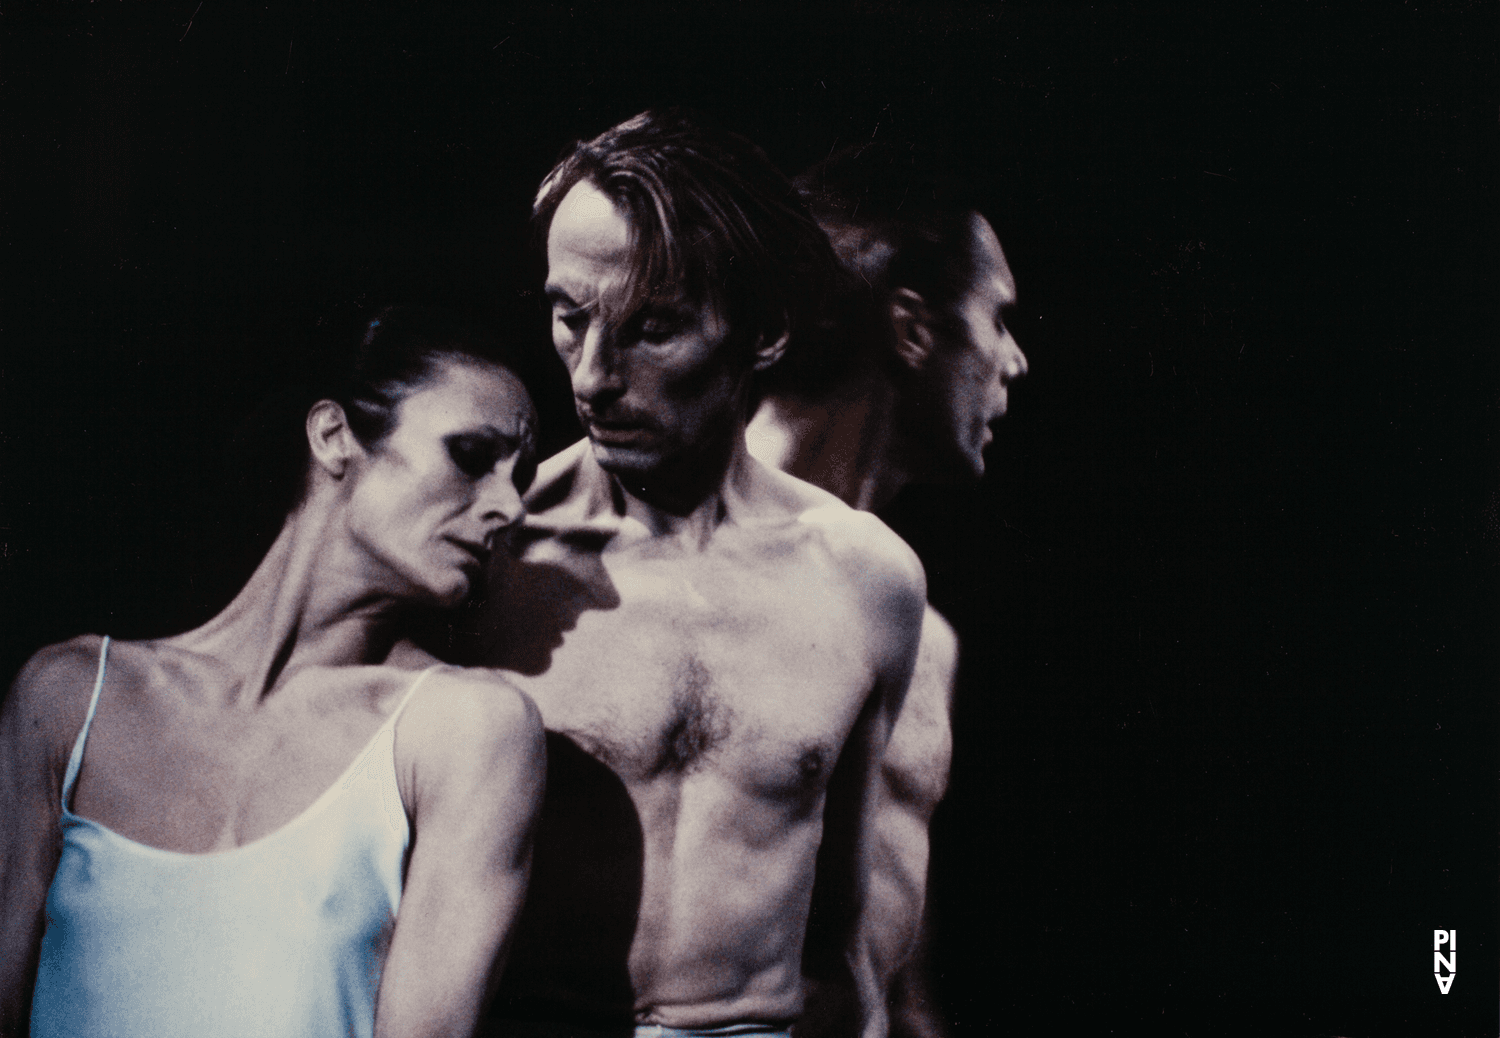 Dominique Mercy, Ed Kortlandt and Malou Airaudo in “Iphigenie auf Tauris” by Pina Bausch